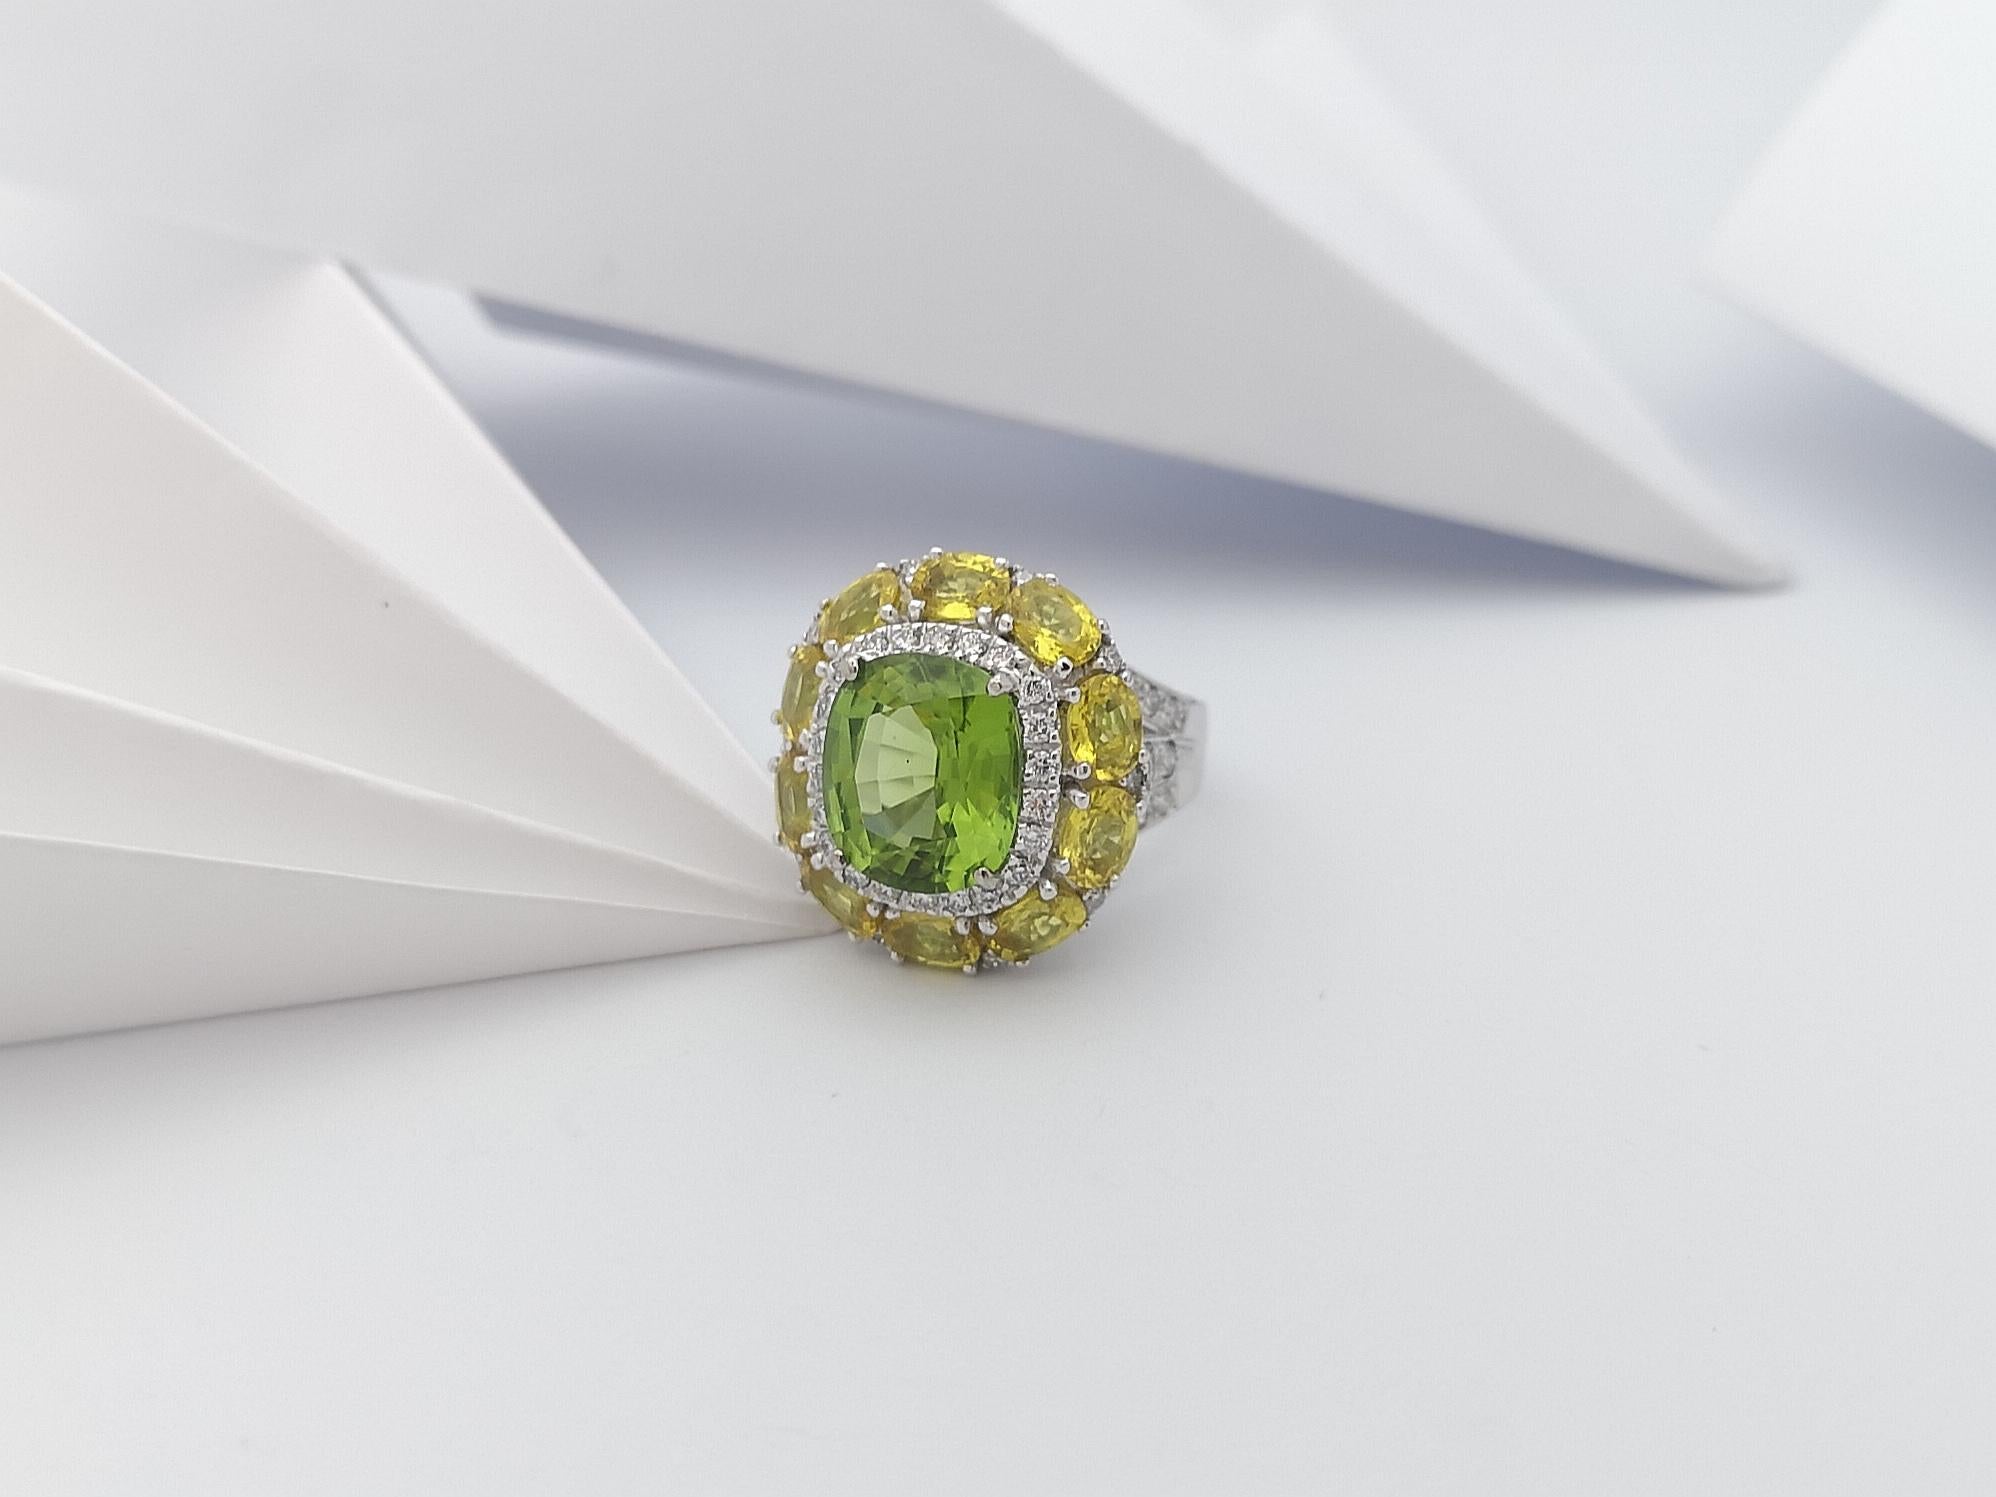 Cushion Cut Peridot, Yellow Sapphire with Diamond Ring in 18 Karat White Gold For Sale 4